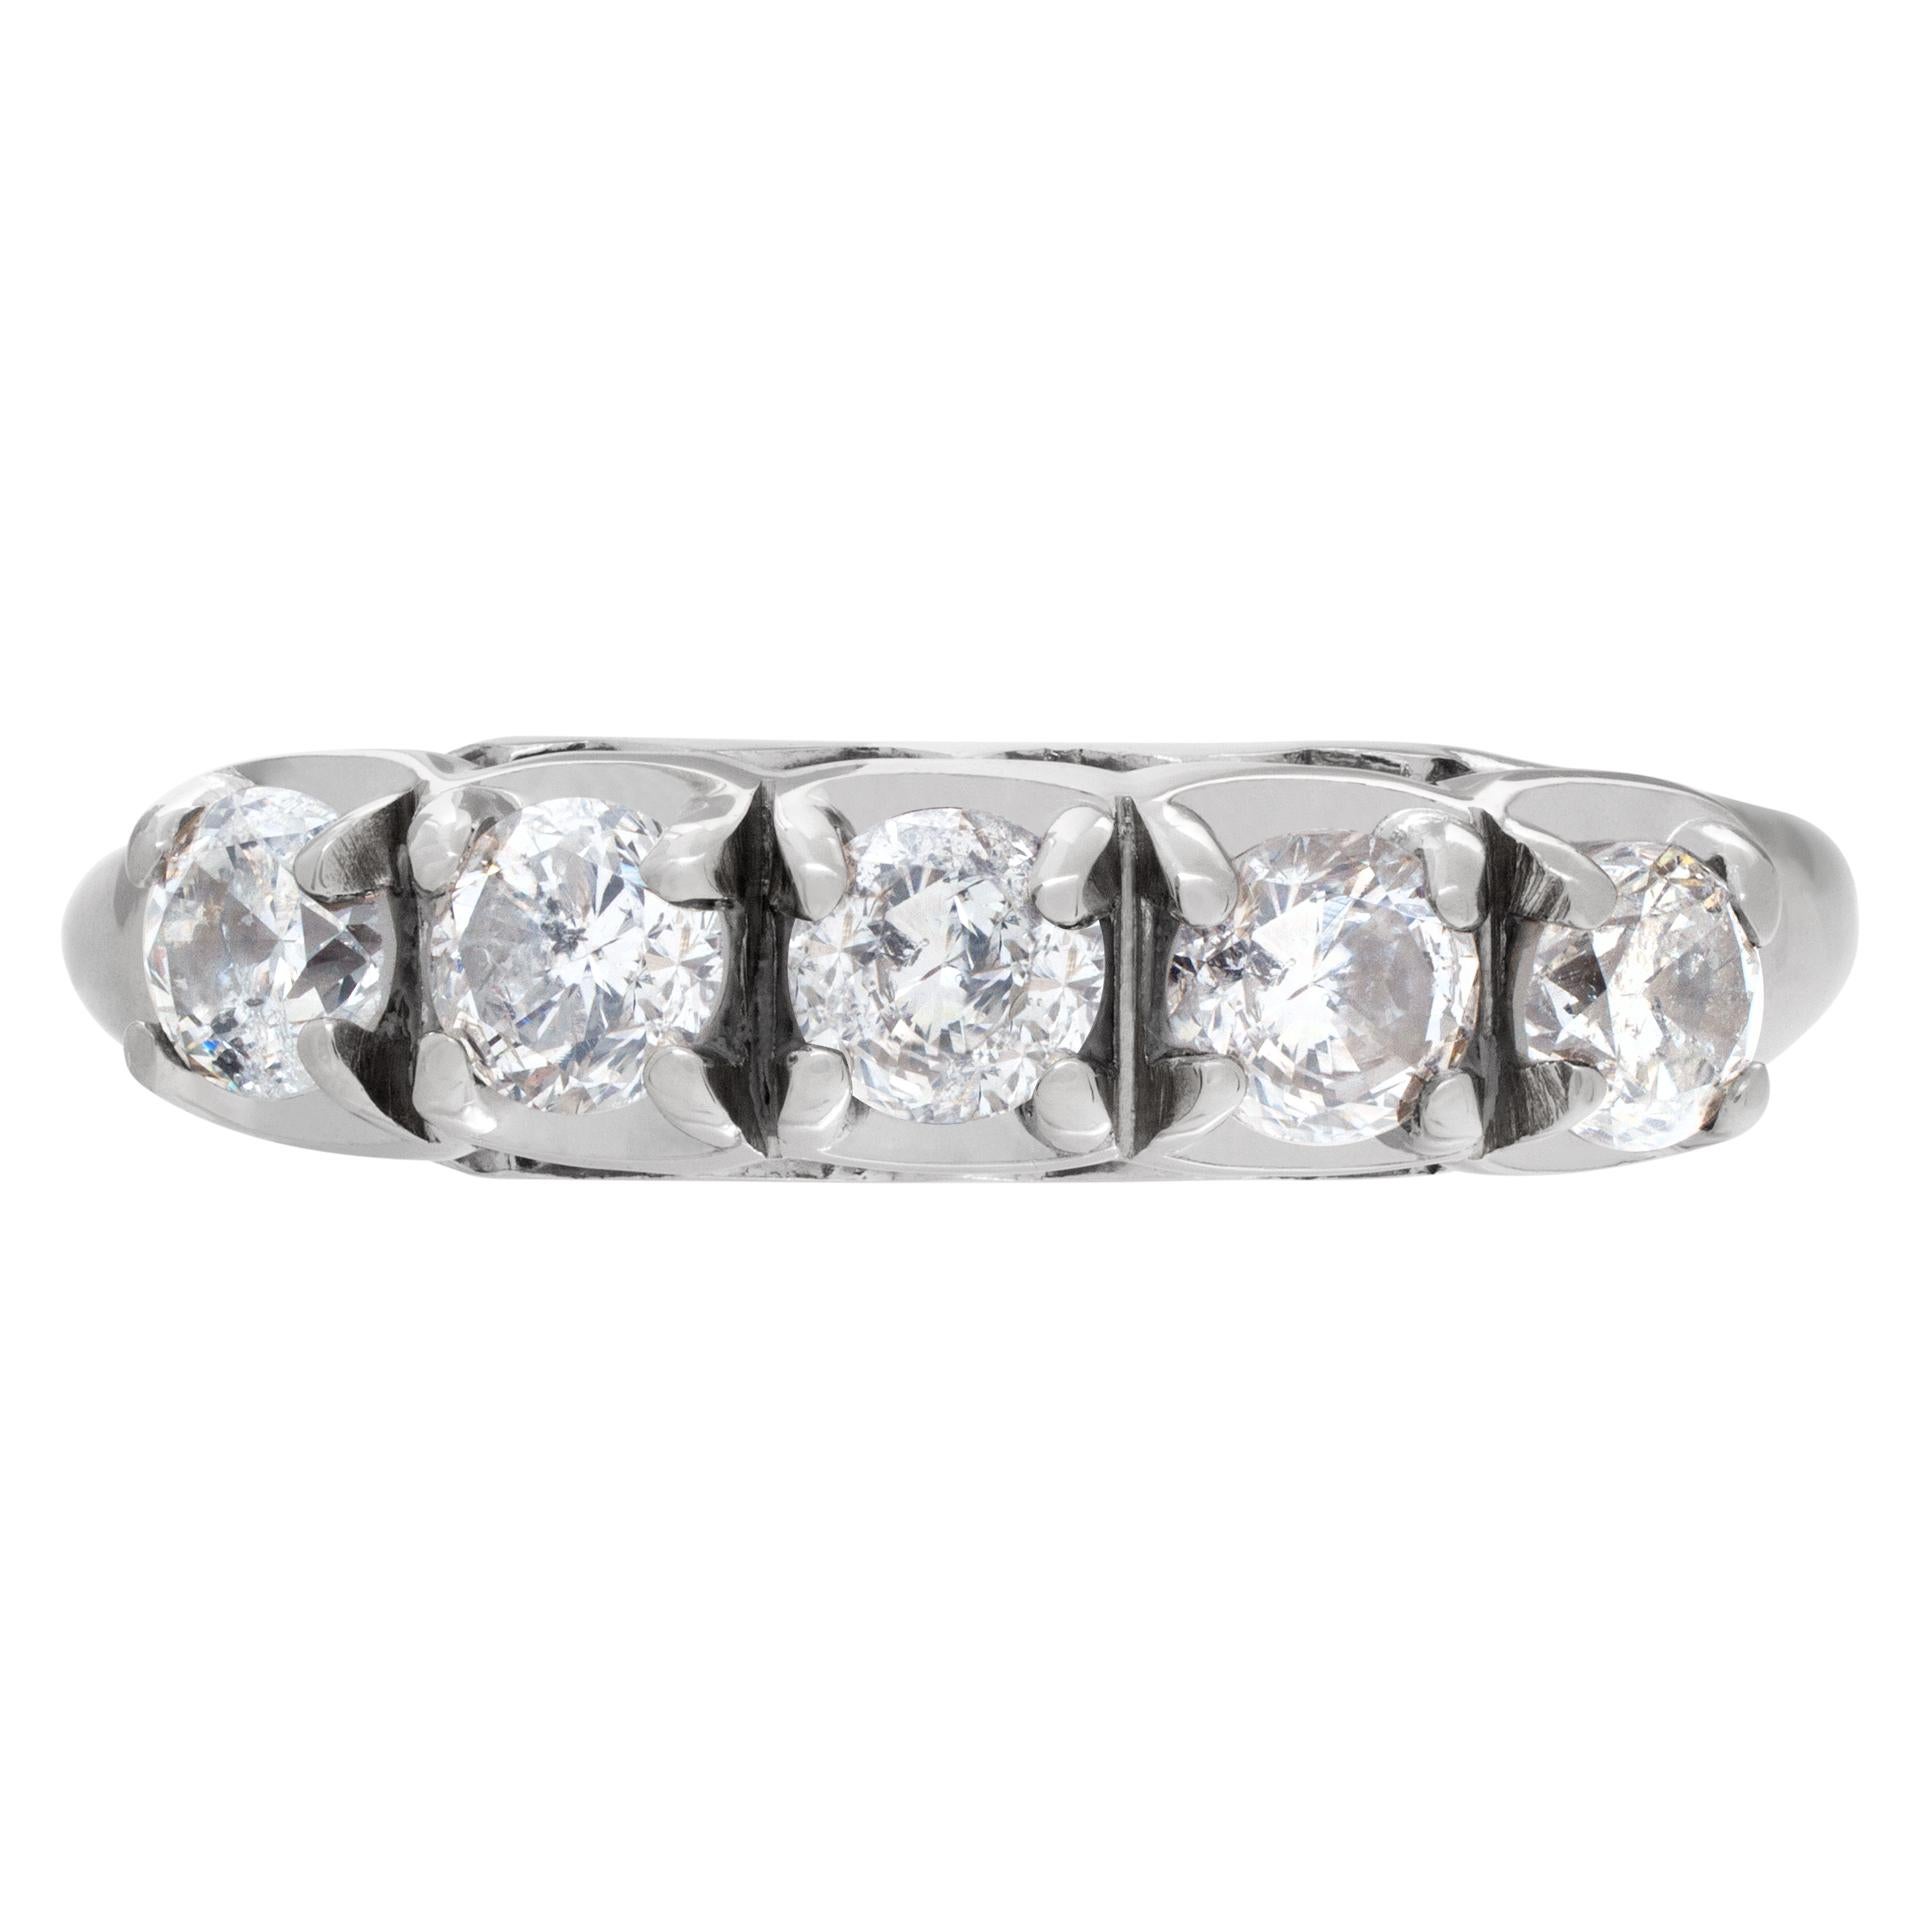 Diamond band in 14k white gold with approx. 1 carat. Size 6.75.

This Diamond ring is currently size 6.75 and some items can be sized up or down, please ask! It weighs 2.7 pennyweights and is 14k.